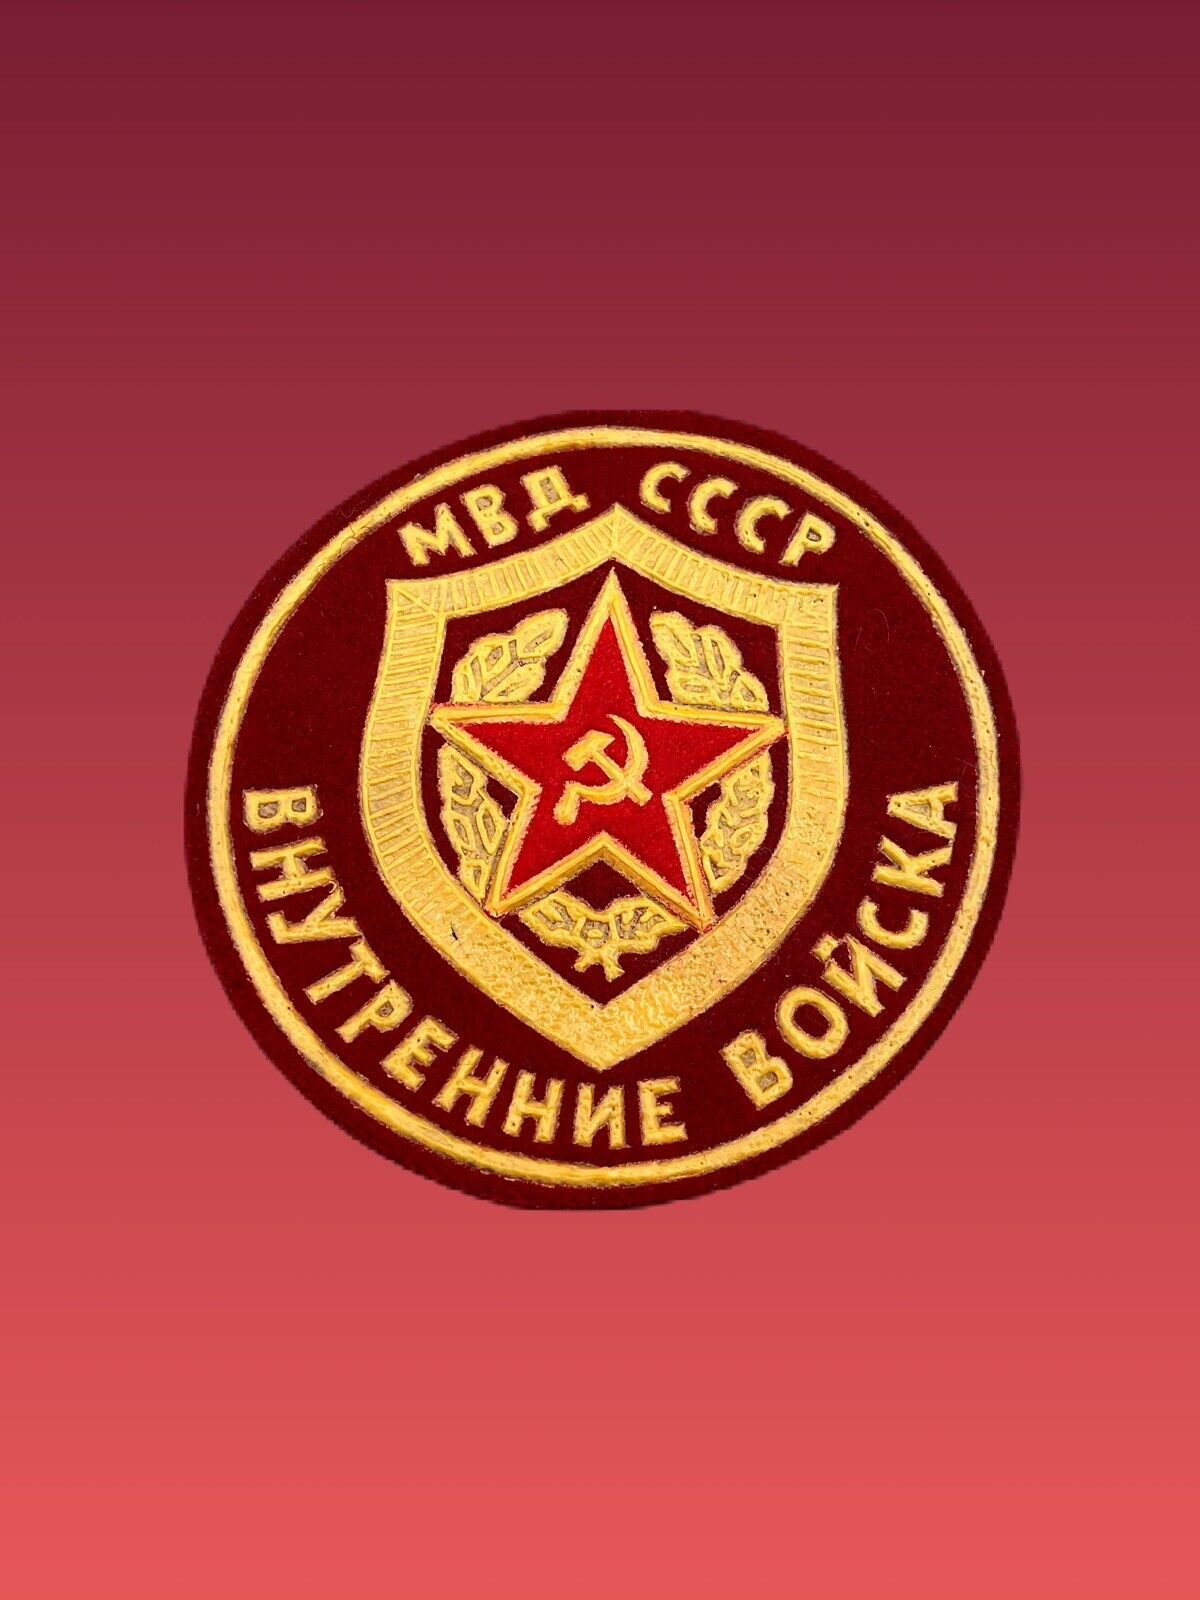 Soviet Russian Sleeve Patch of the Internal Army Troops of the MVD (#7)